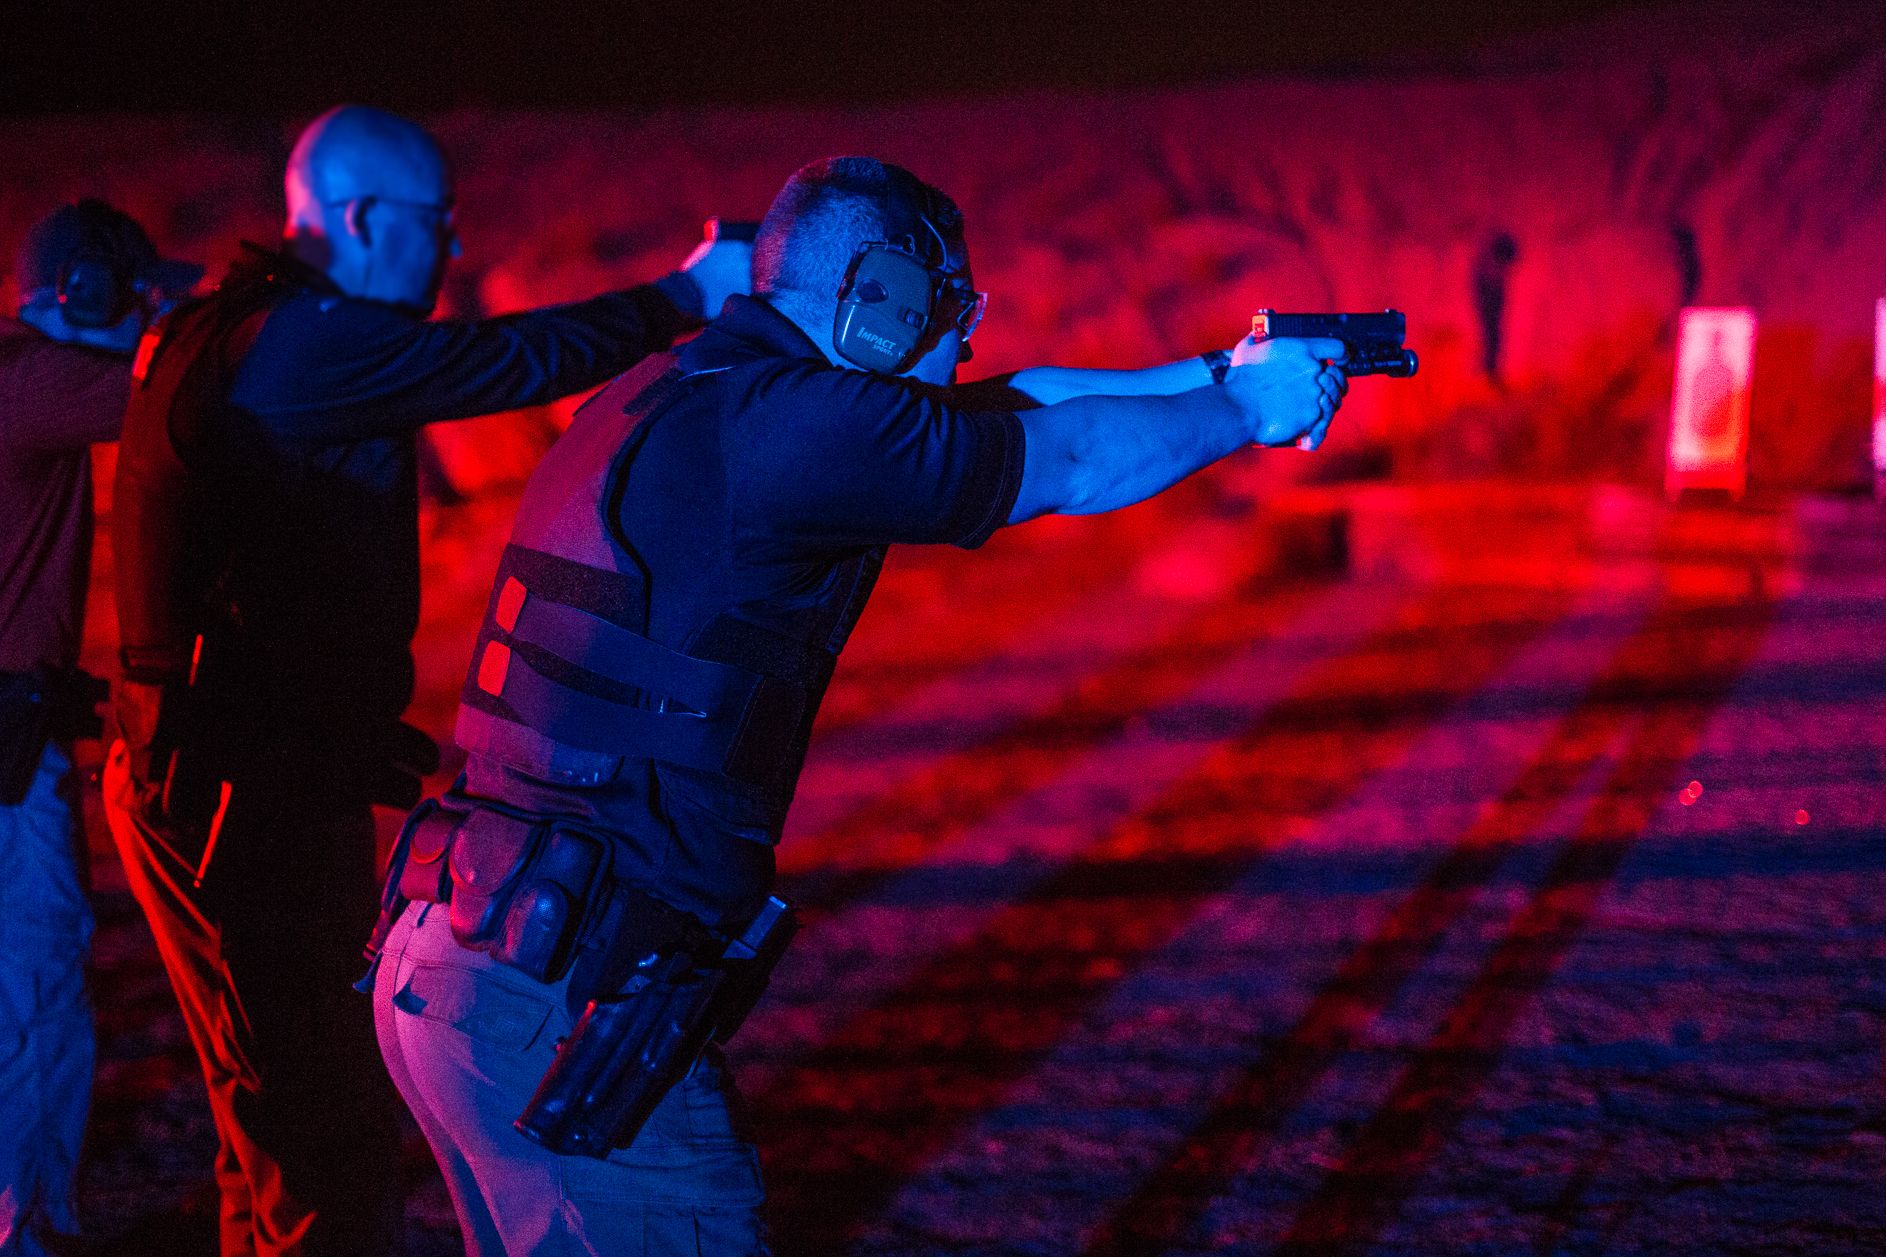 Police Officers training on the firing range at night with red and blue lights